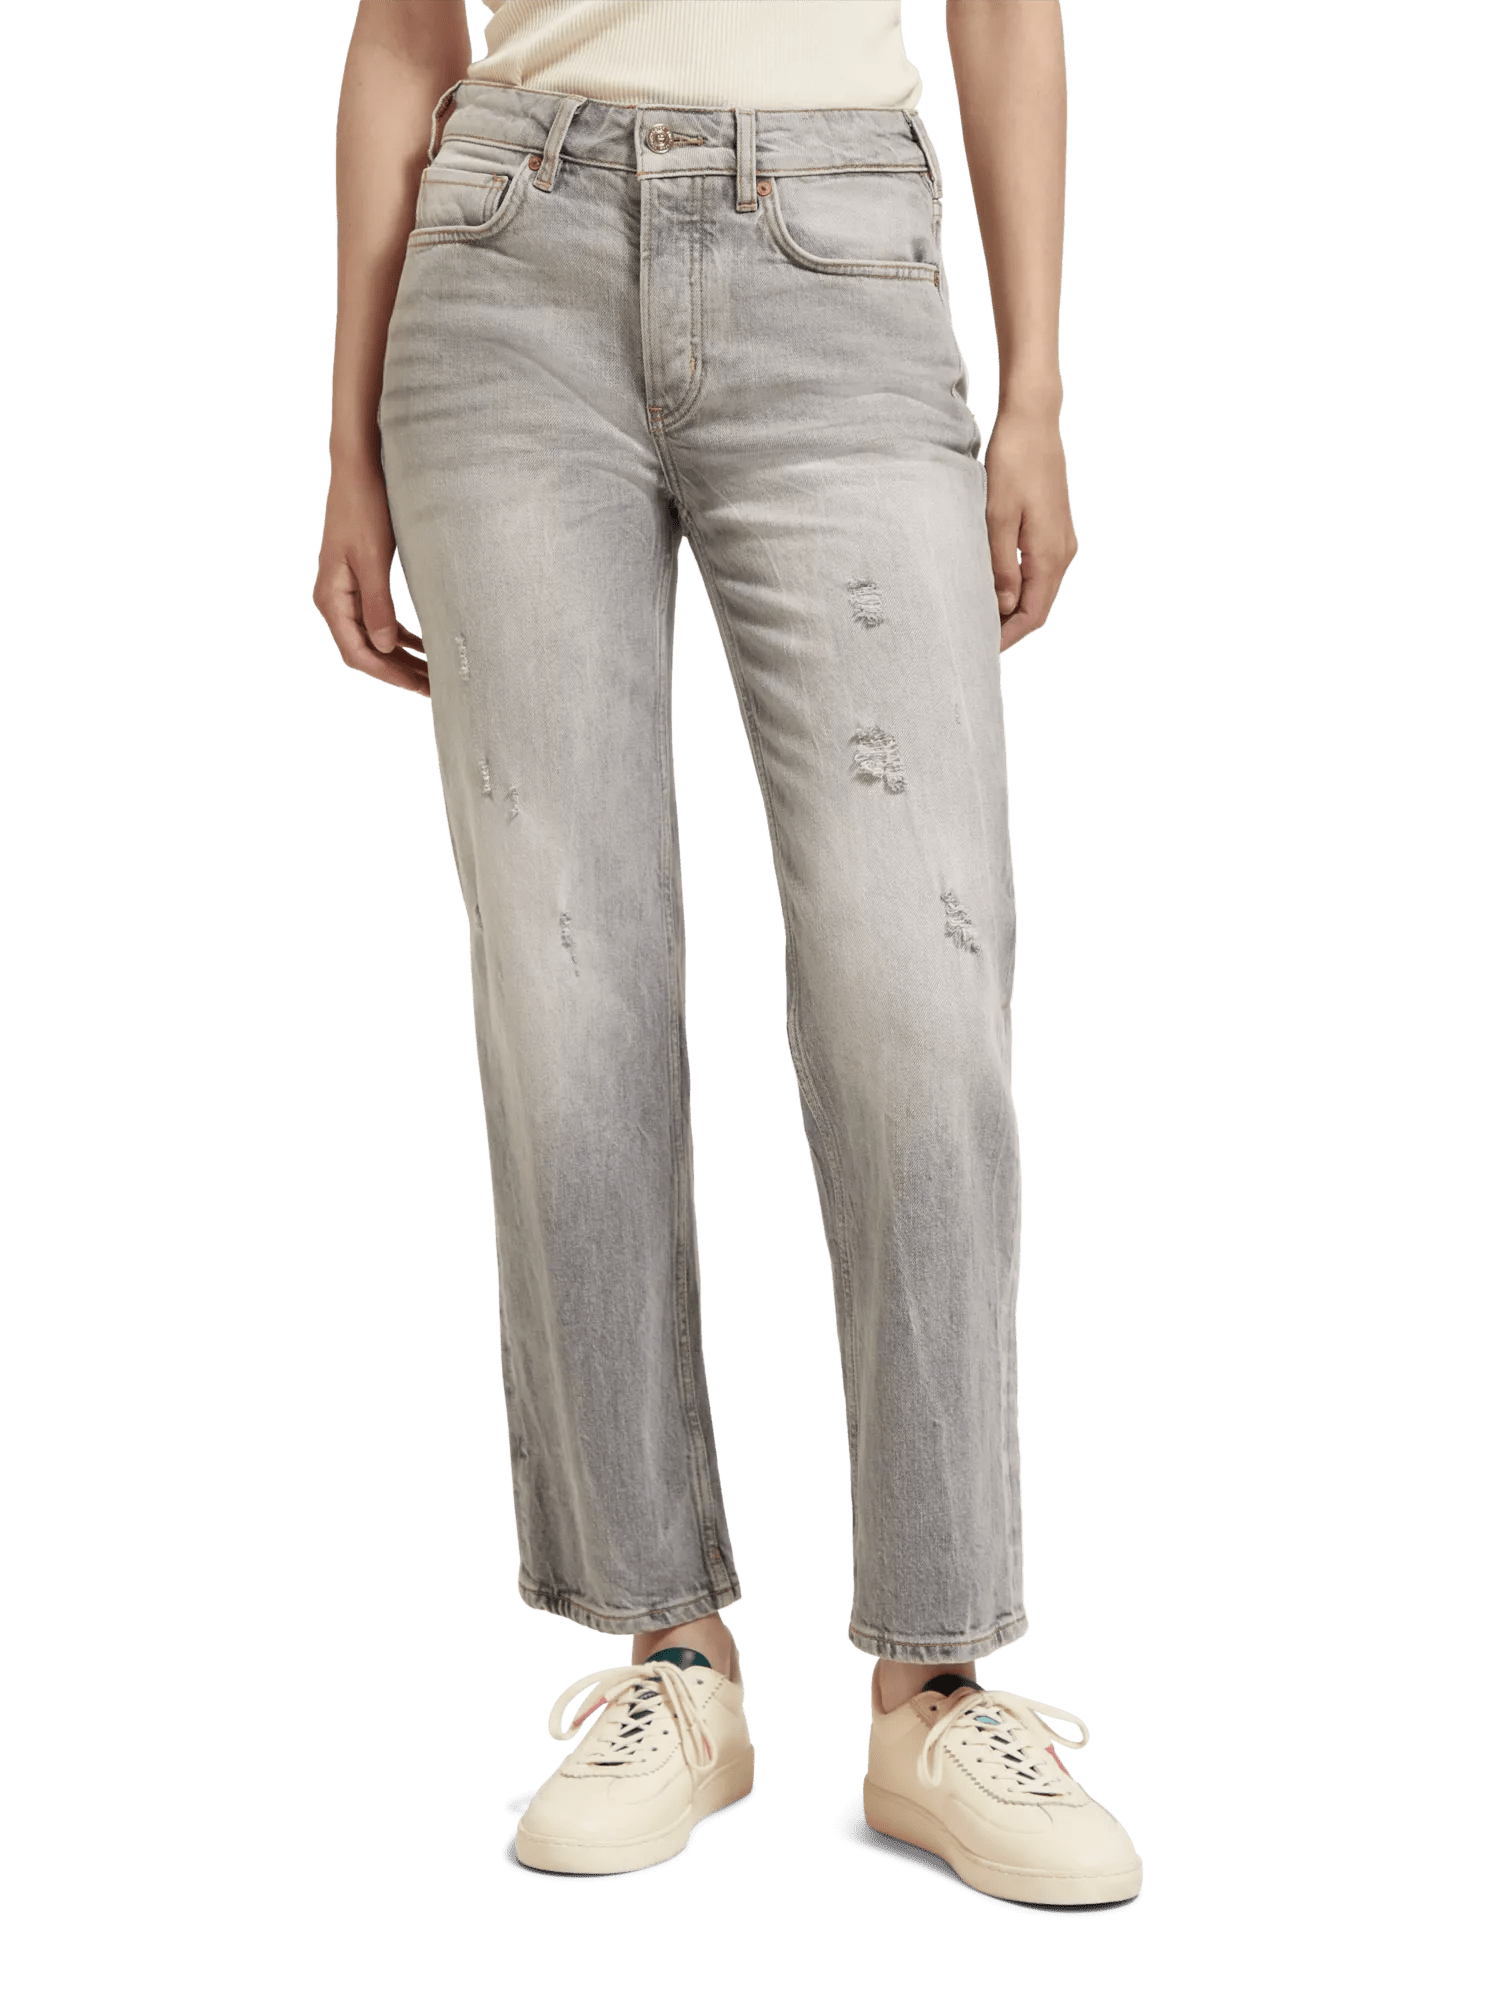 Scotch & Soda The Sky high-rise straight leg jeans FIT-CRP